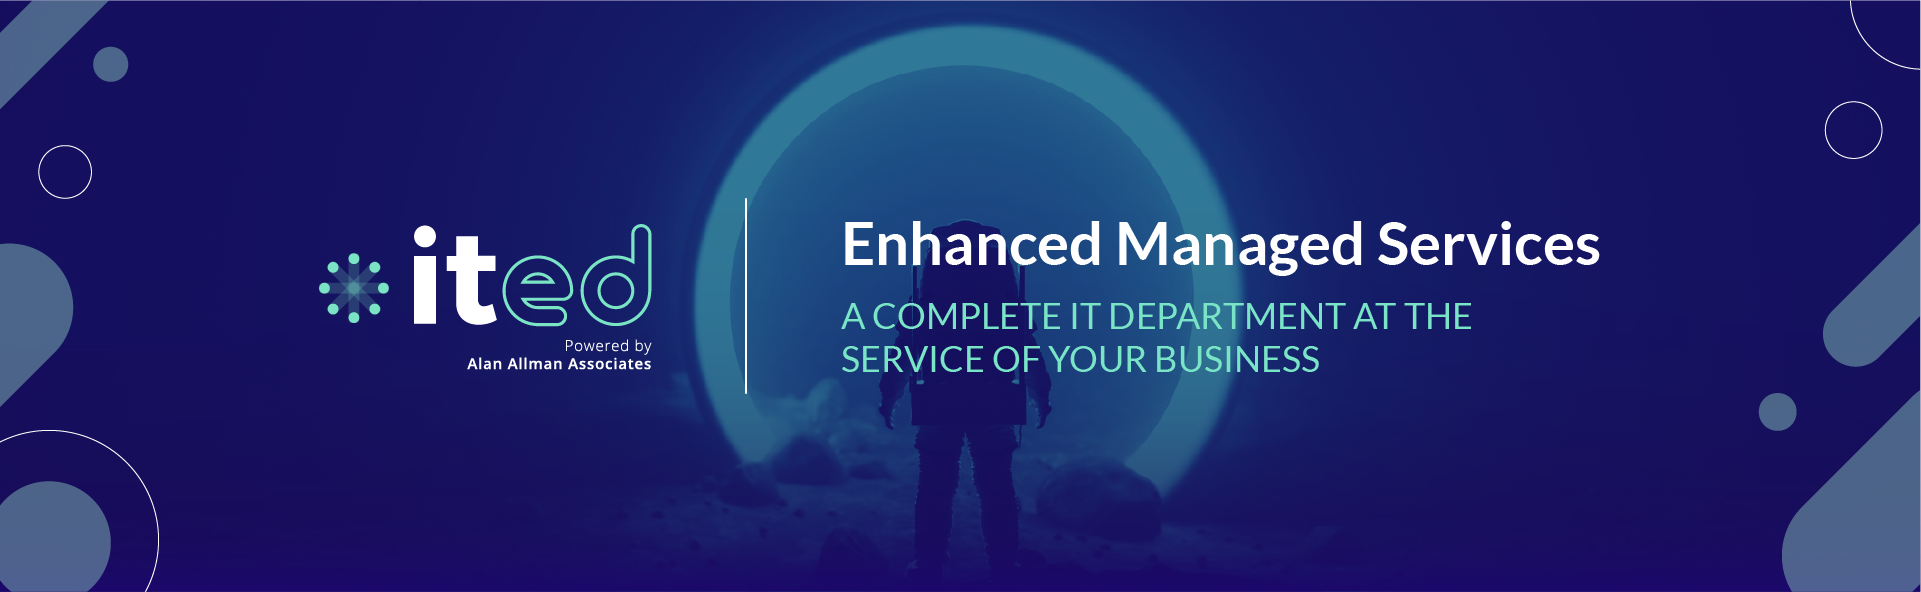 ited enhanced managed service